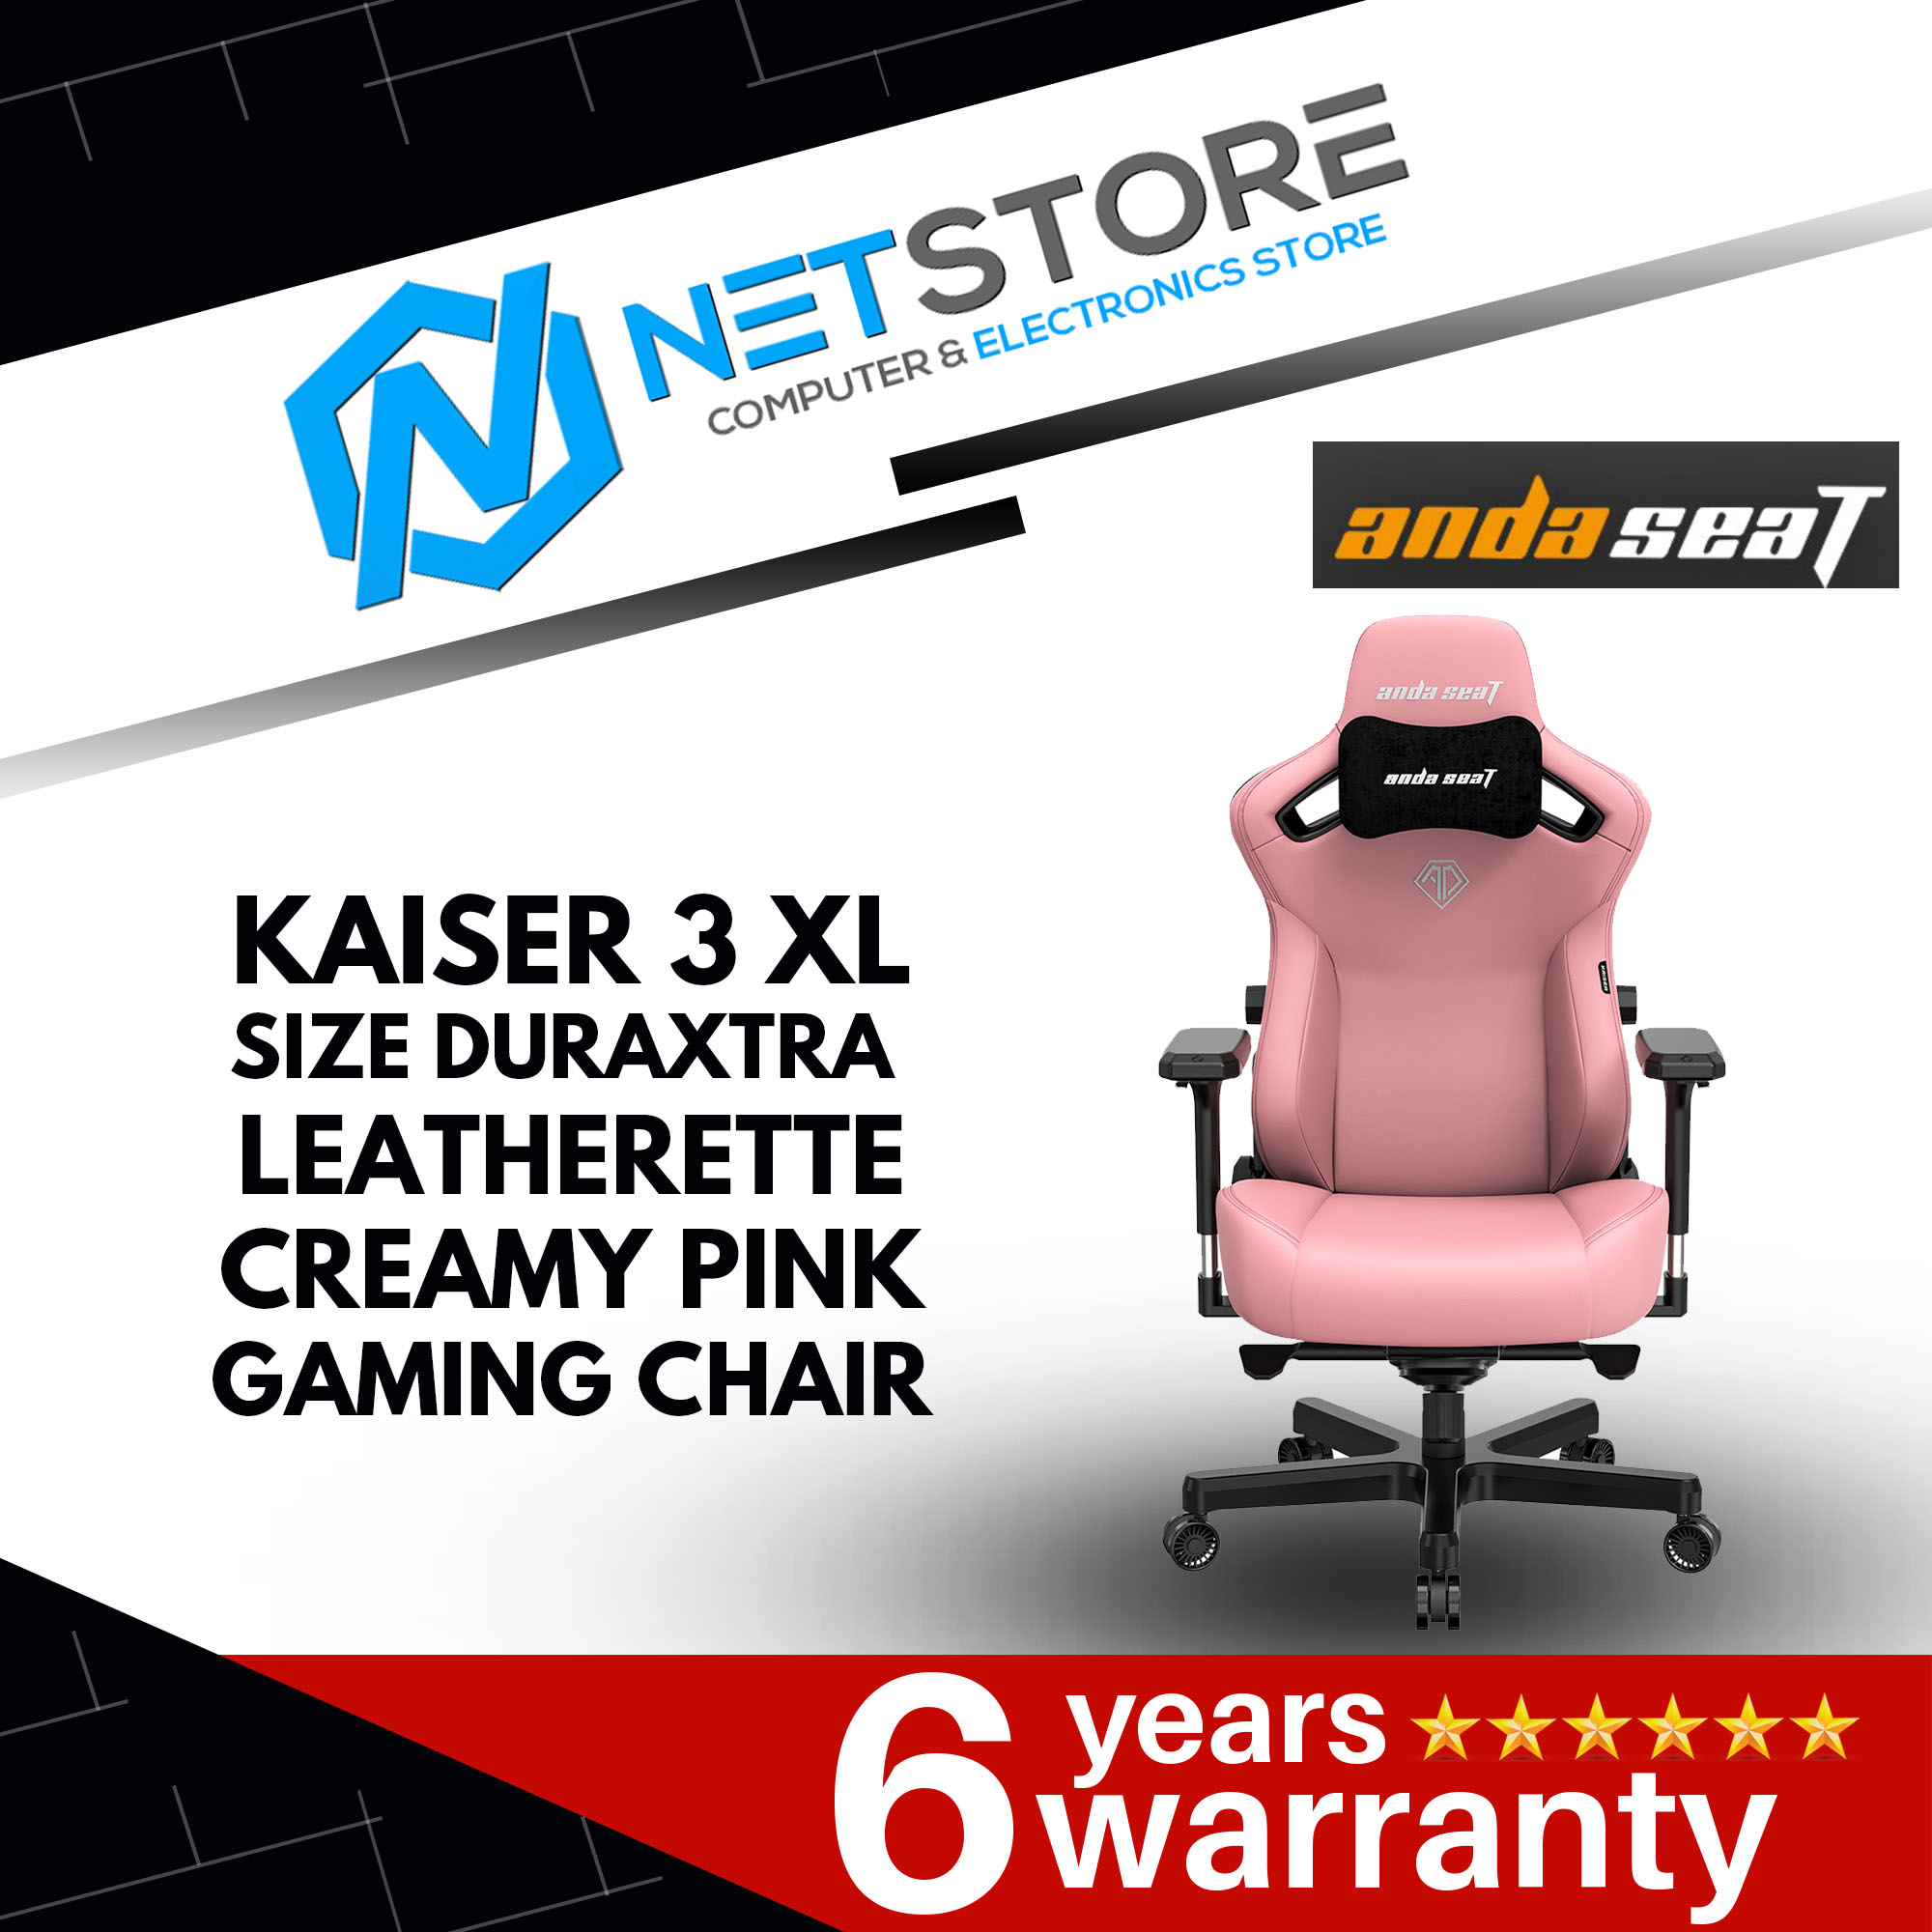 ANDA SEAT KAISER 3 XL SIZE DURAXTRA  LEATHERETTE - CREAMY PINK